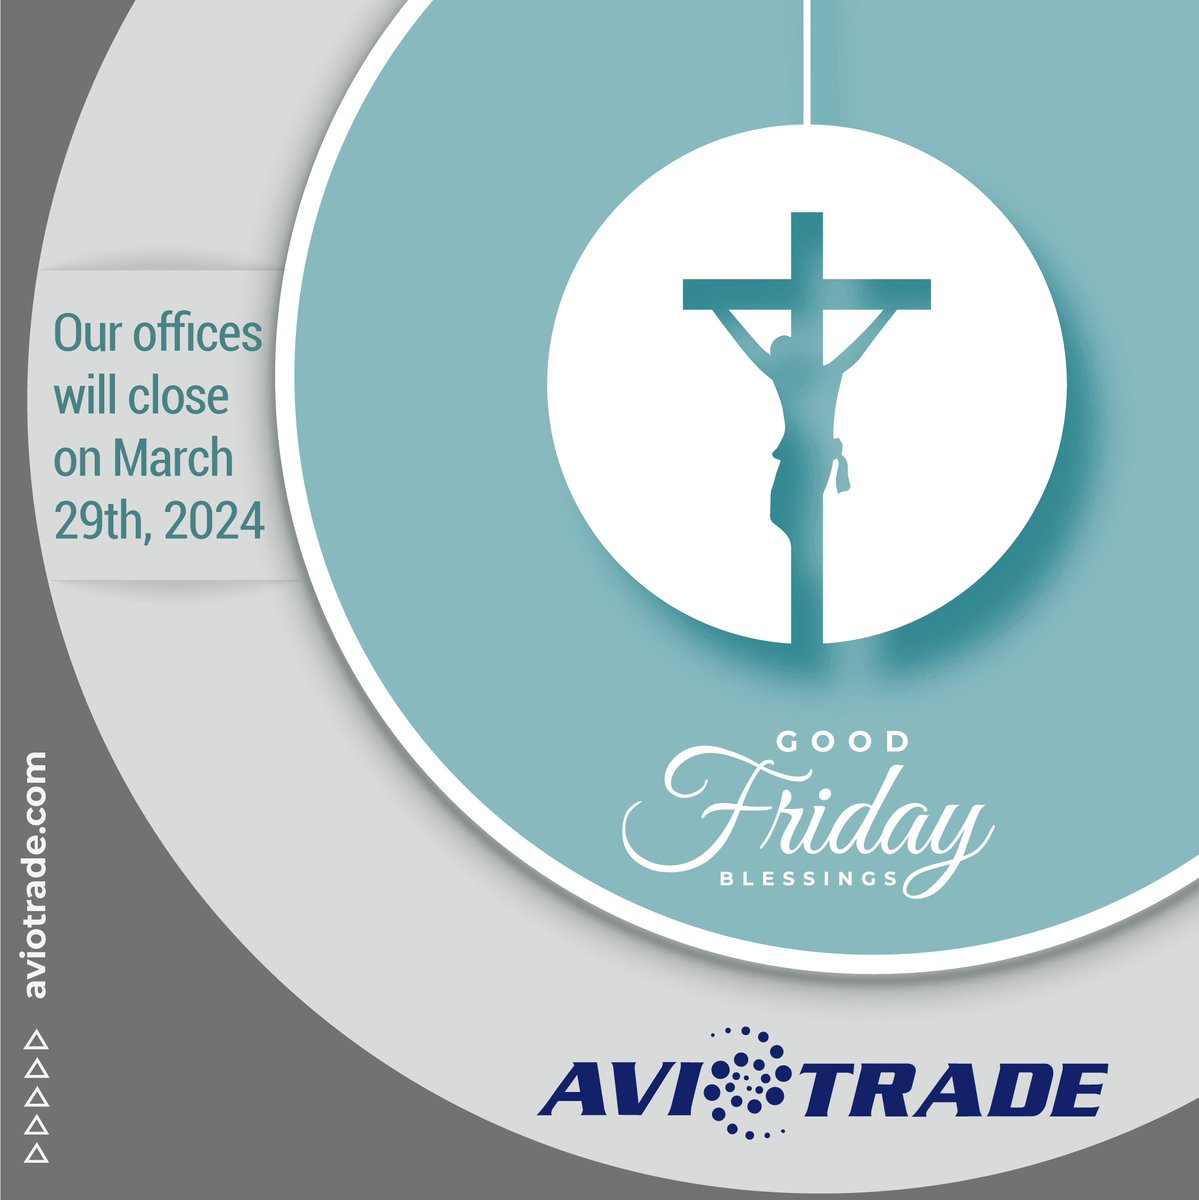 ✈ Our offices in Miami will close on March 29th, 2024.

📌 𝐂𝐨𝐧𝐭𝐚𝐜𝐭 𝐮𝐬:  sales@aviotradegroup.com

#AvioTrade #AvioTradeGroup #Aviation #Distributor #Distribution #Quality  #AllYouNeed #AviationIndustry #SupplyChain #VMI #Chemicals #Consumables #Tools #GoodFriday